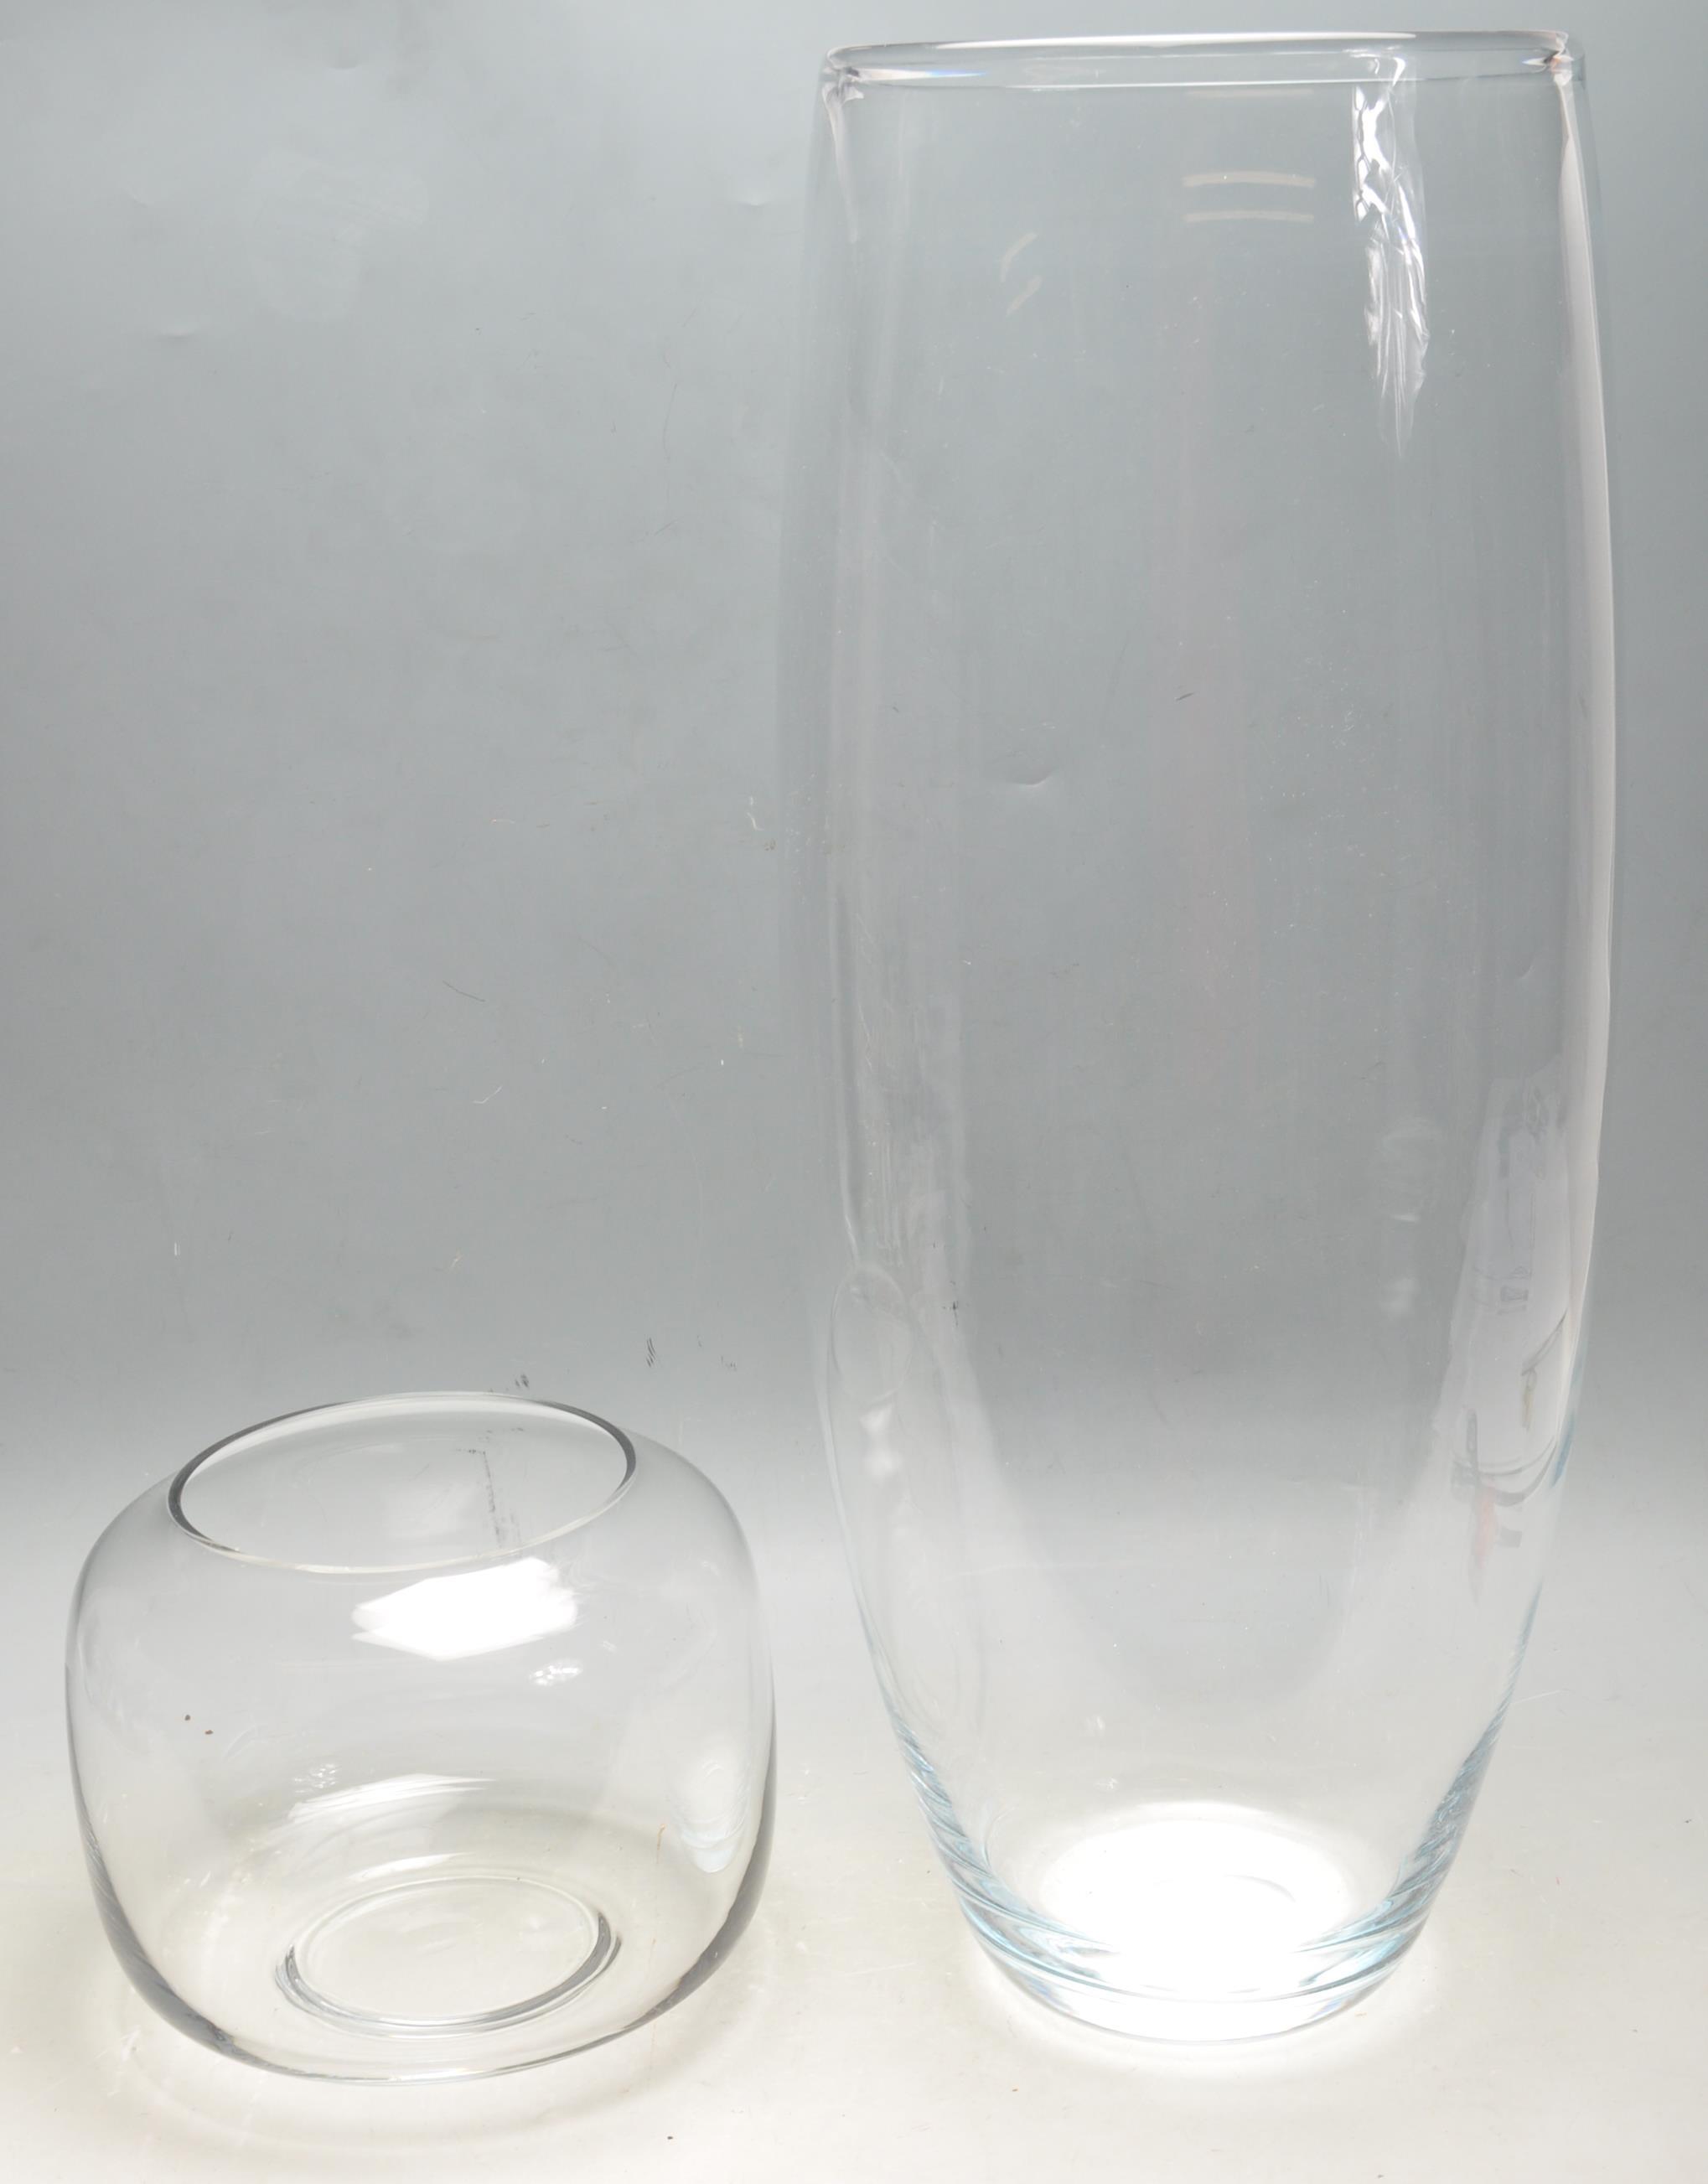 LARGE CONTEMPORARY GLASS VASE